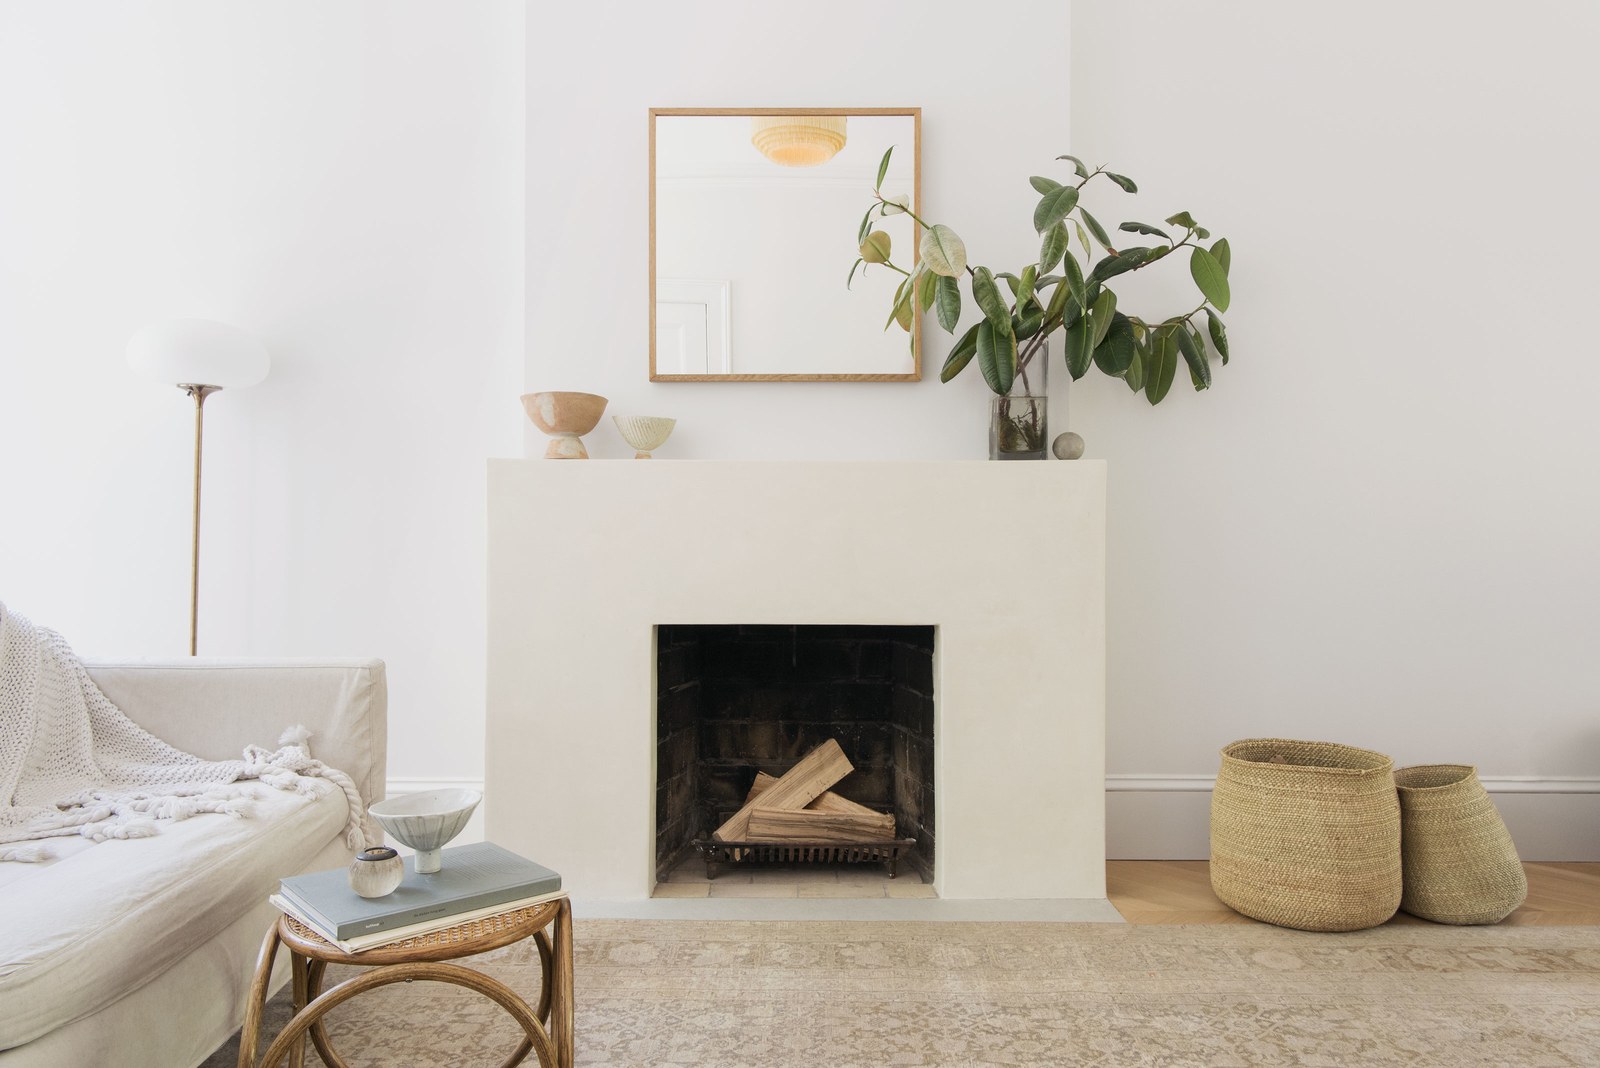  For the minimalist fireplace mantel, Roberts found a skilled craftsman to apply tadelakt, a waterproof plaster, by hand in the Moroccan tradition. "The cost was comparable to tile but it gave it such a unique look," she says. 